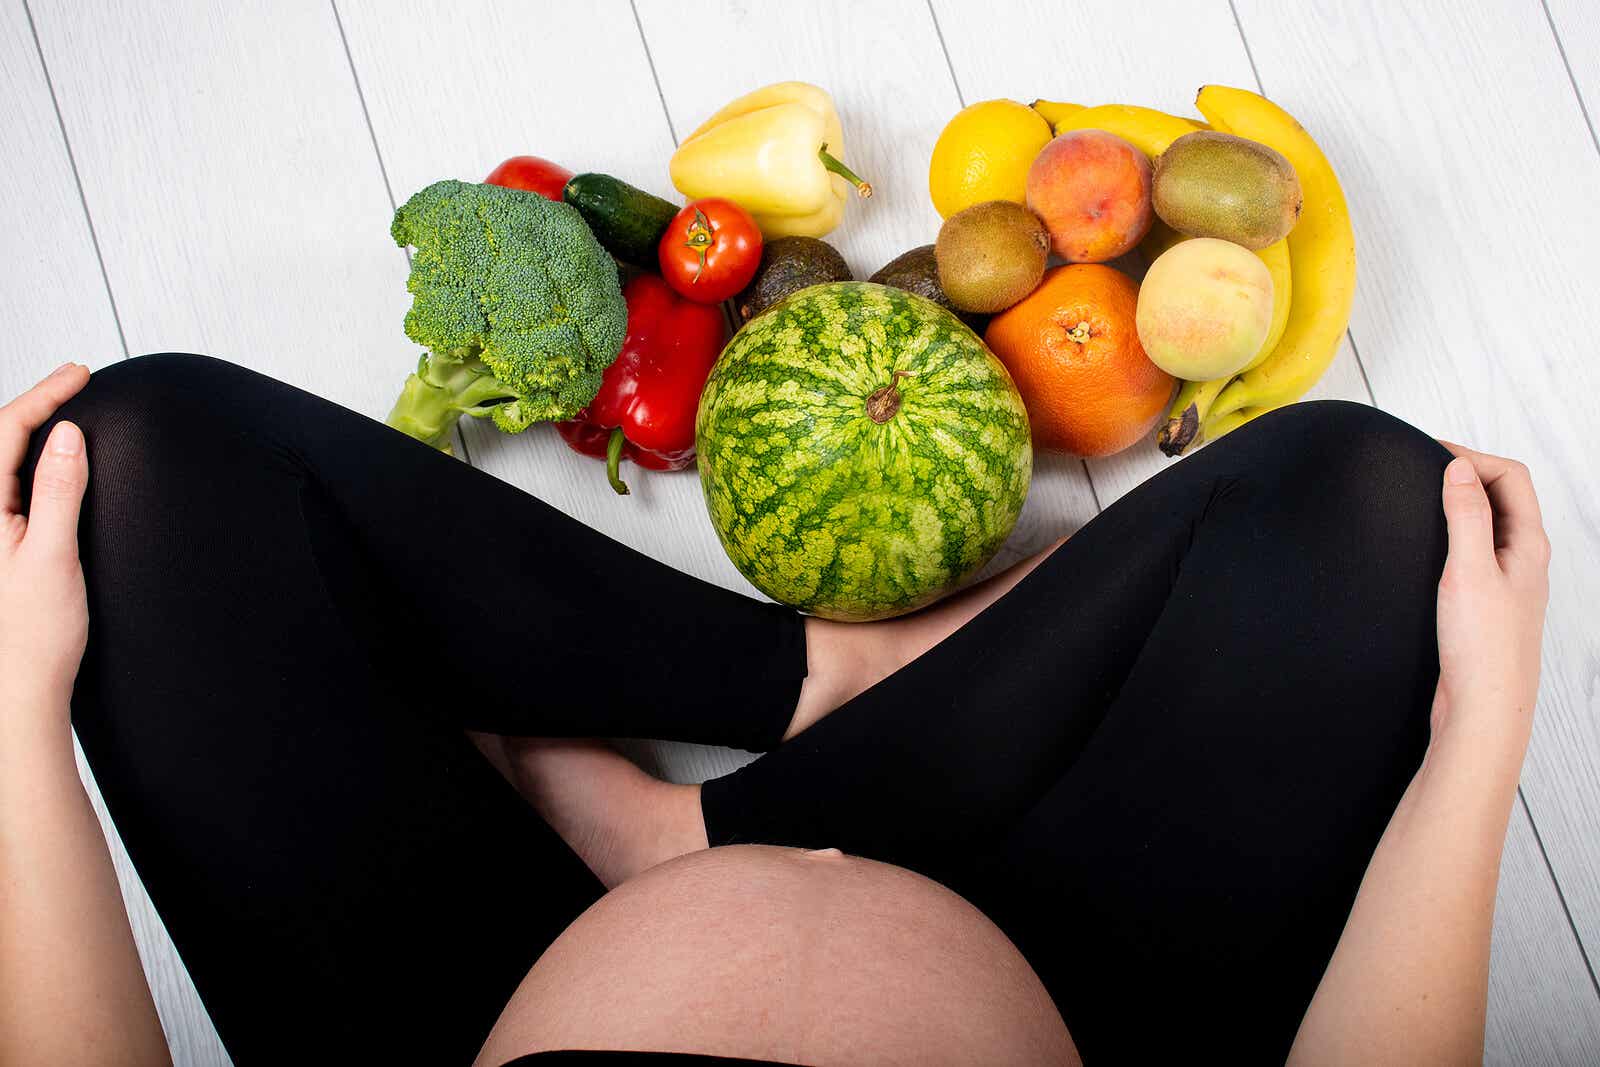  The Importance of Vitamin K During Pregnancy